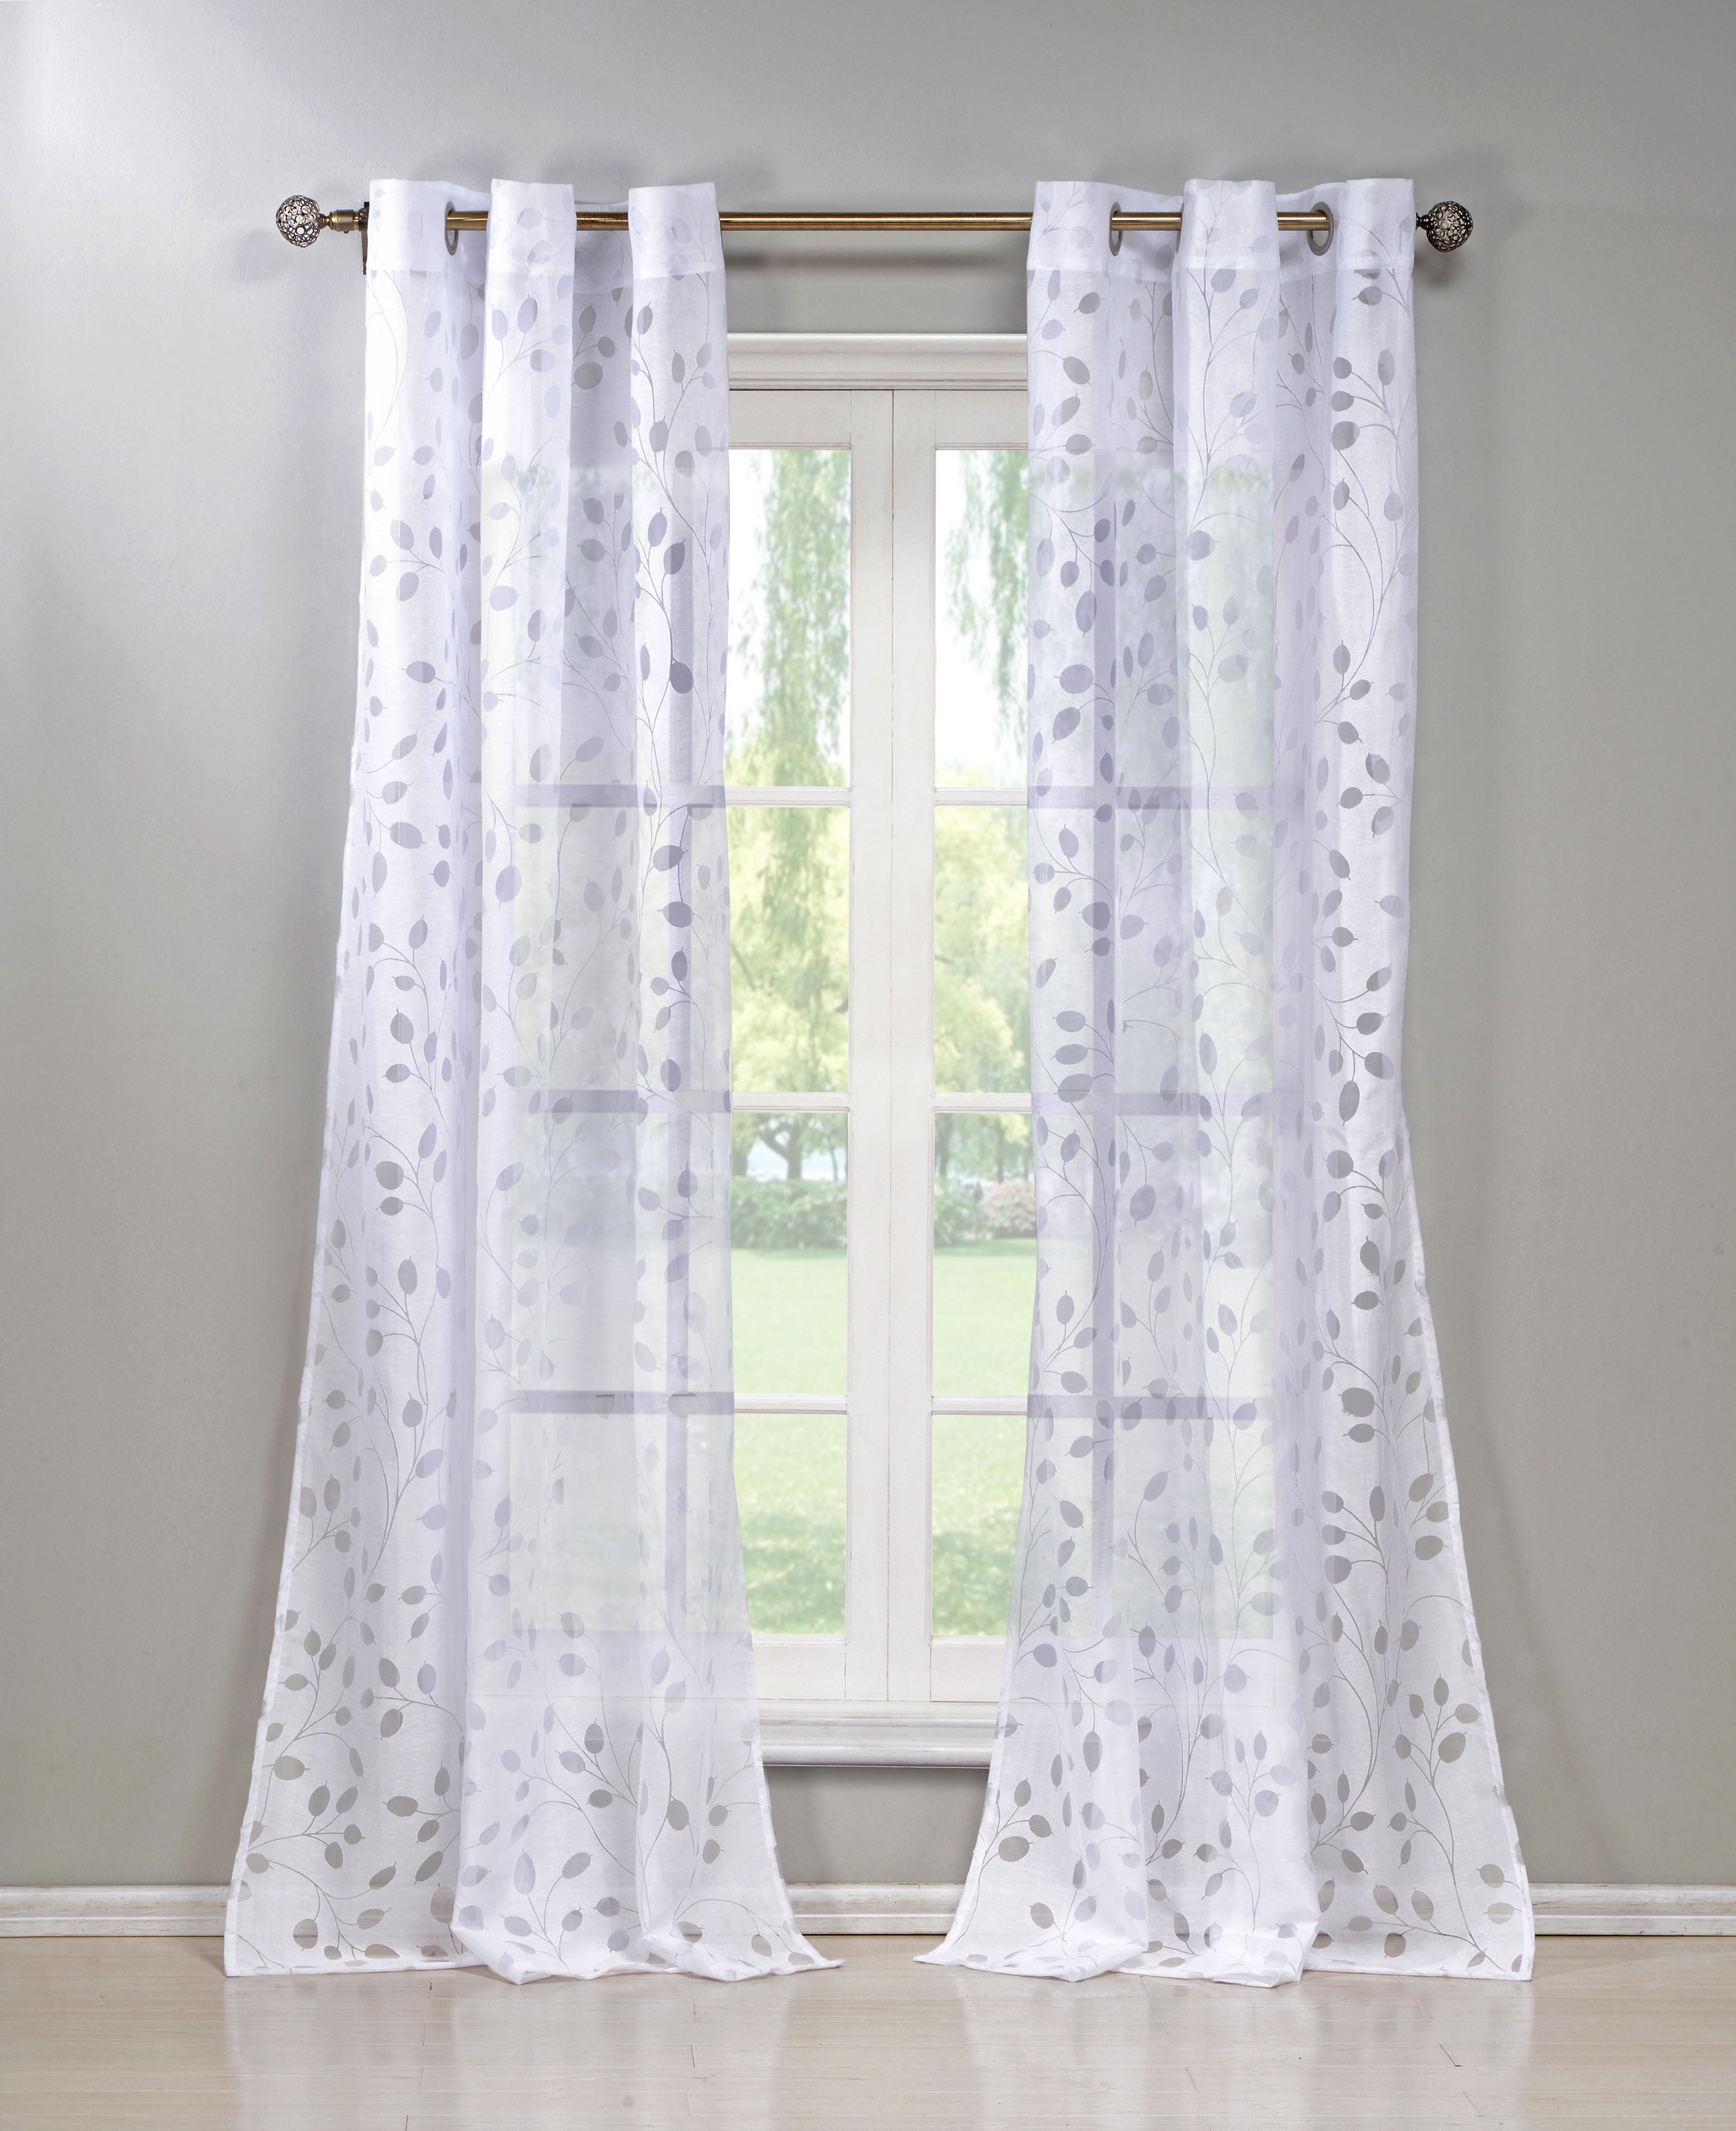 Choosing White Curtains With Pattern